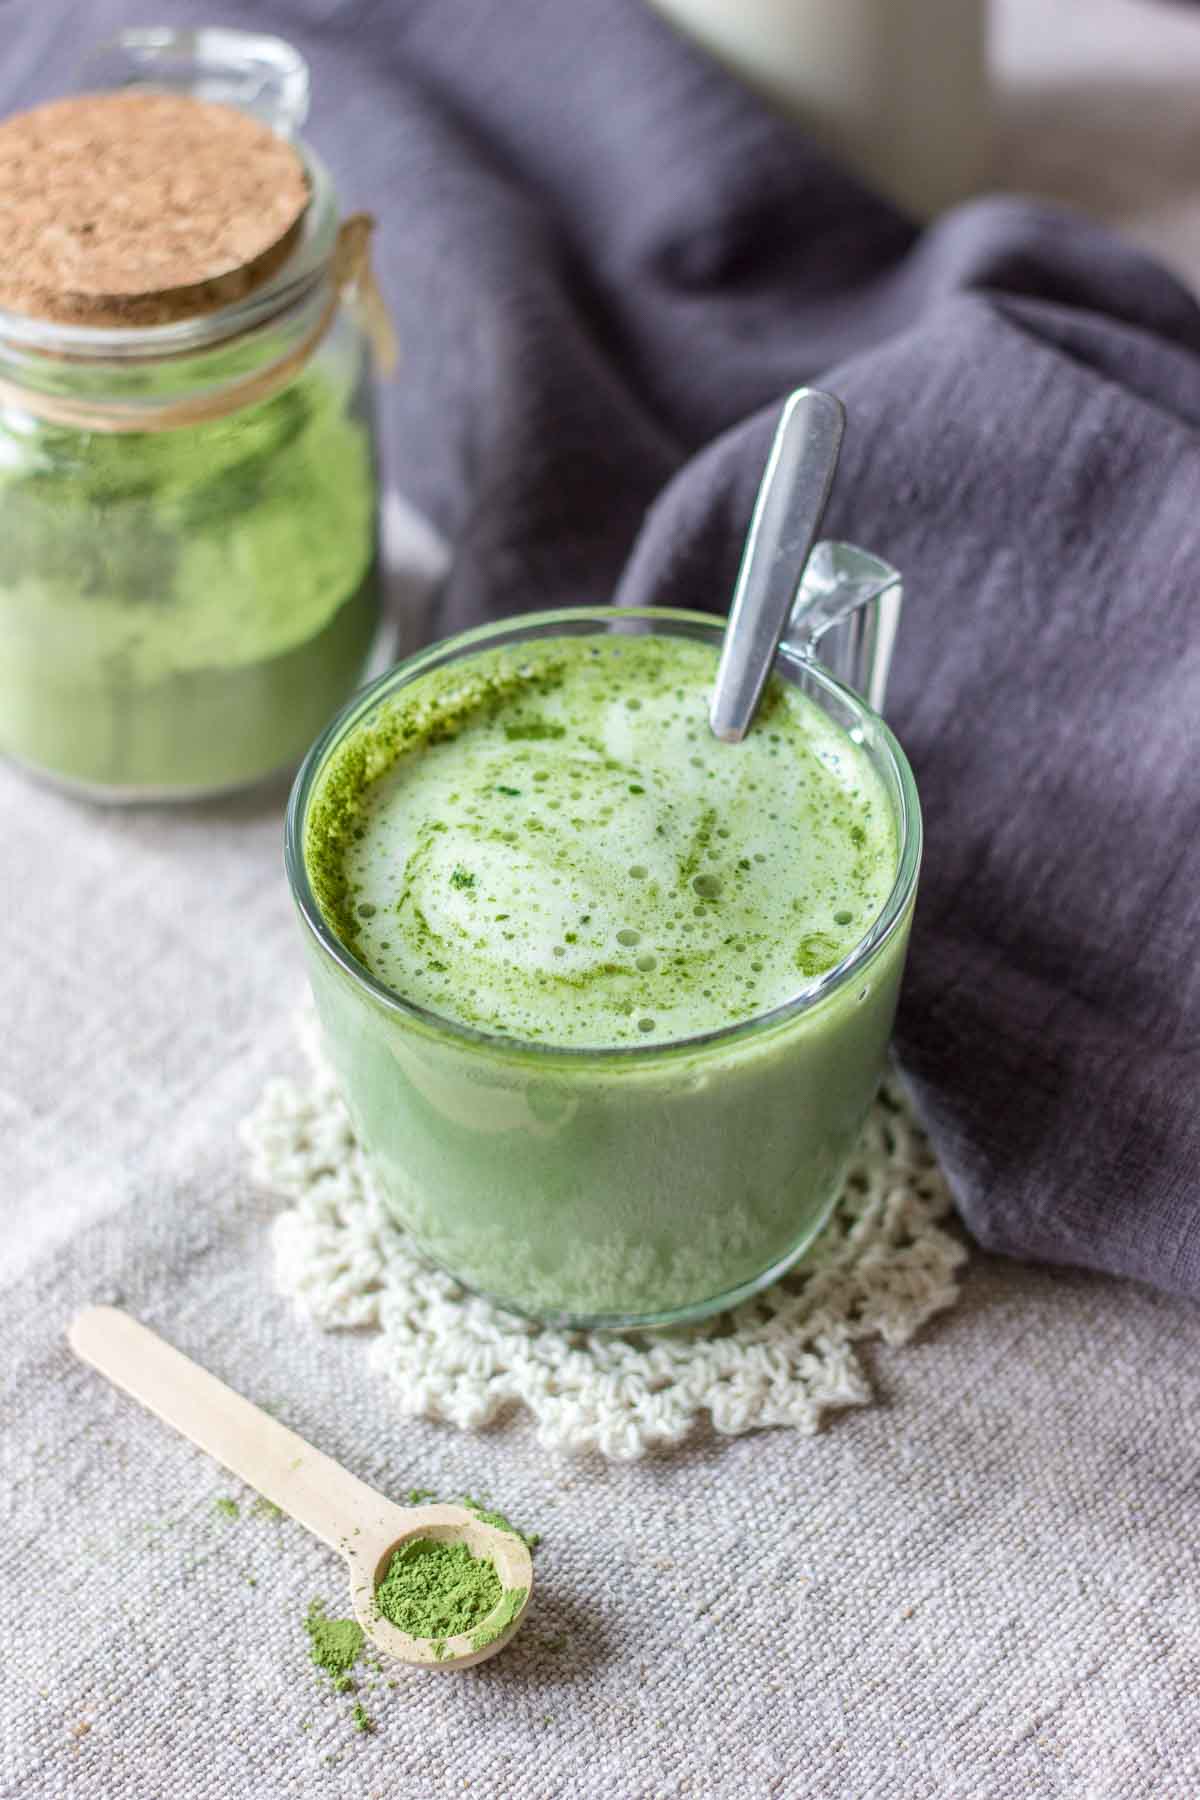 Matcha latte served in a mug with a spoon